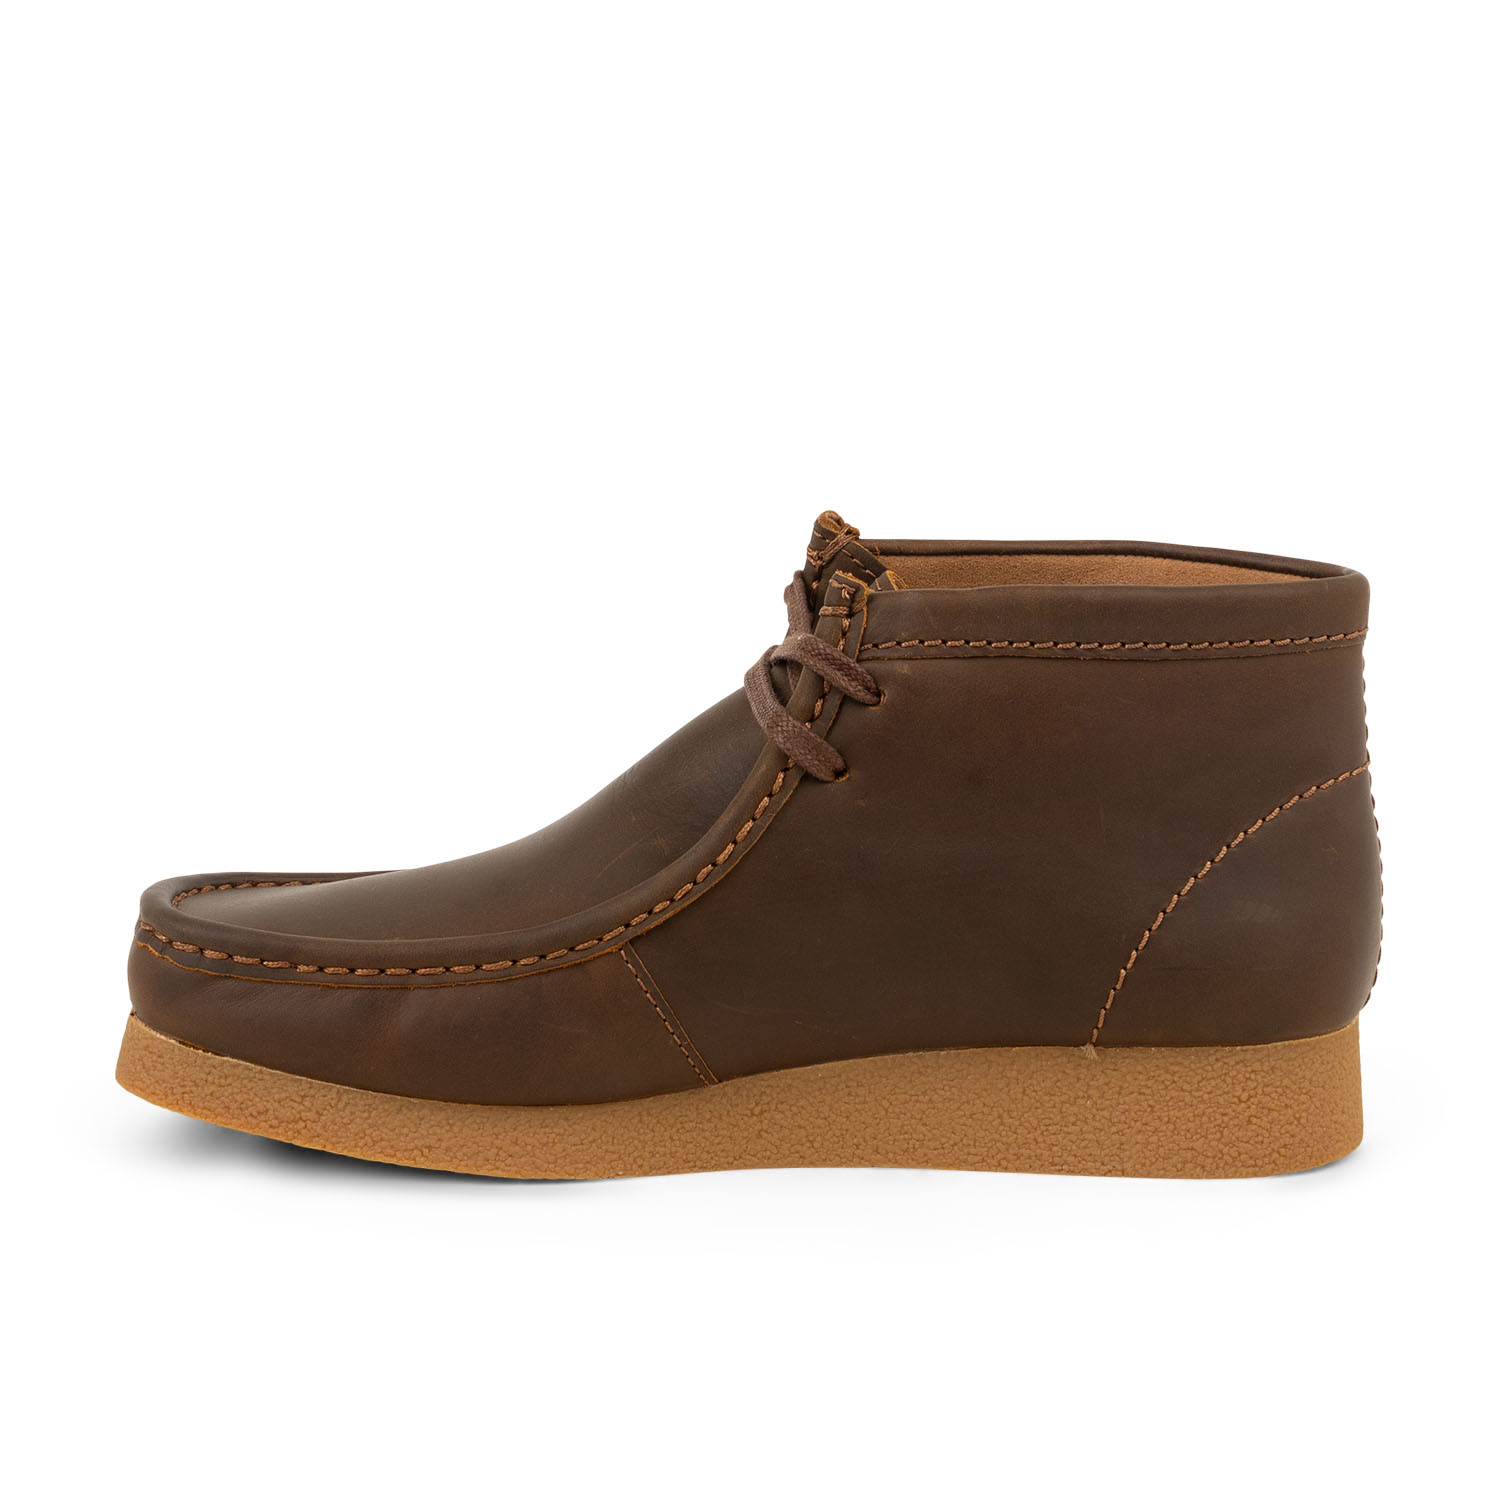 04 - WALLABY EVO - CLARKS - Chaussures à lacets - Cuir